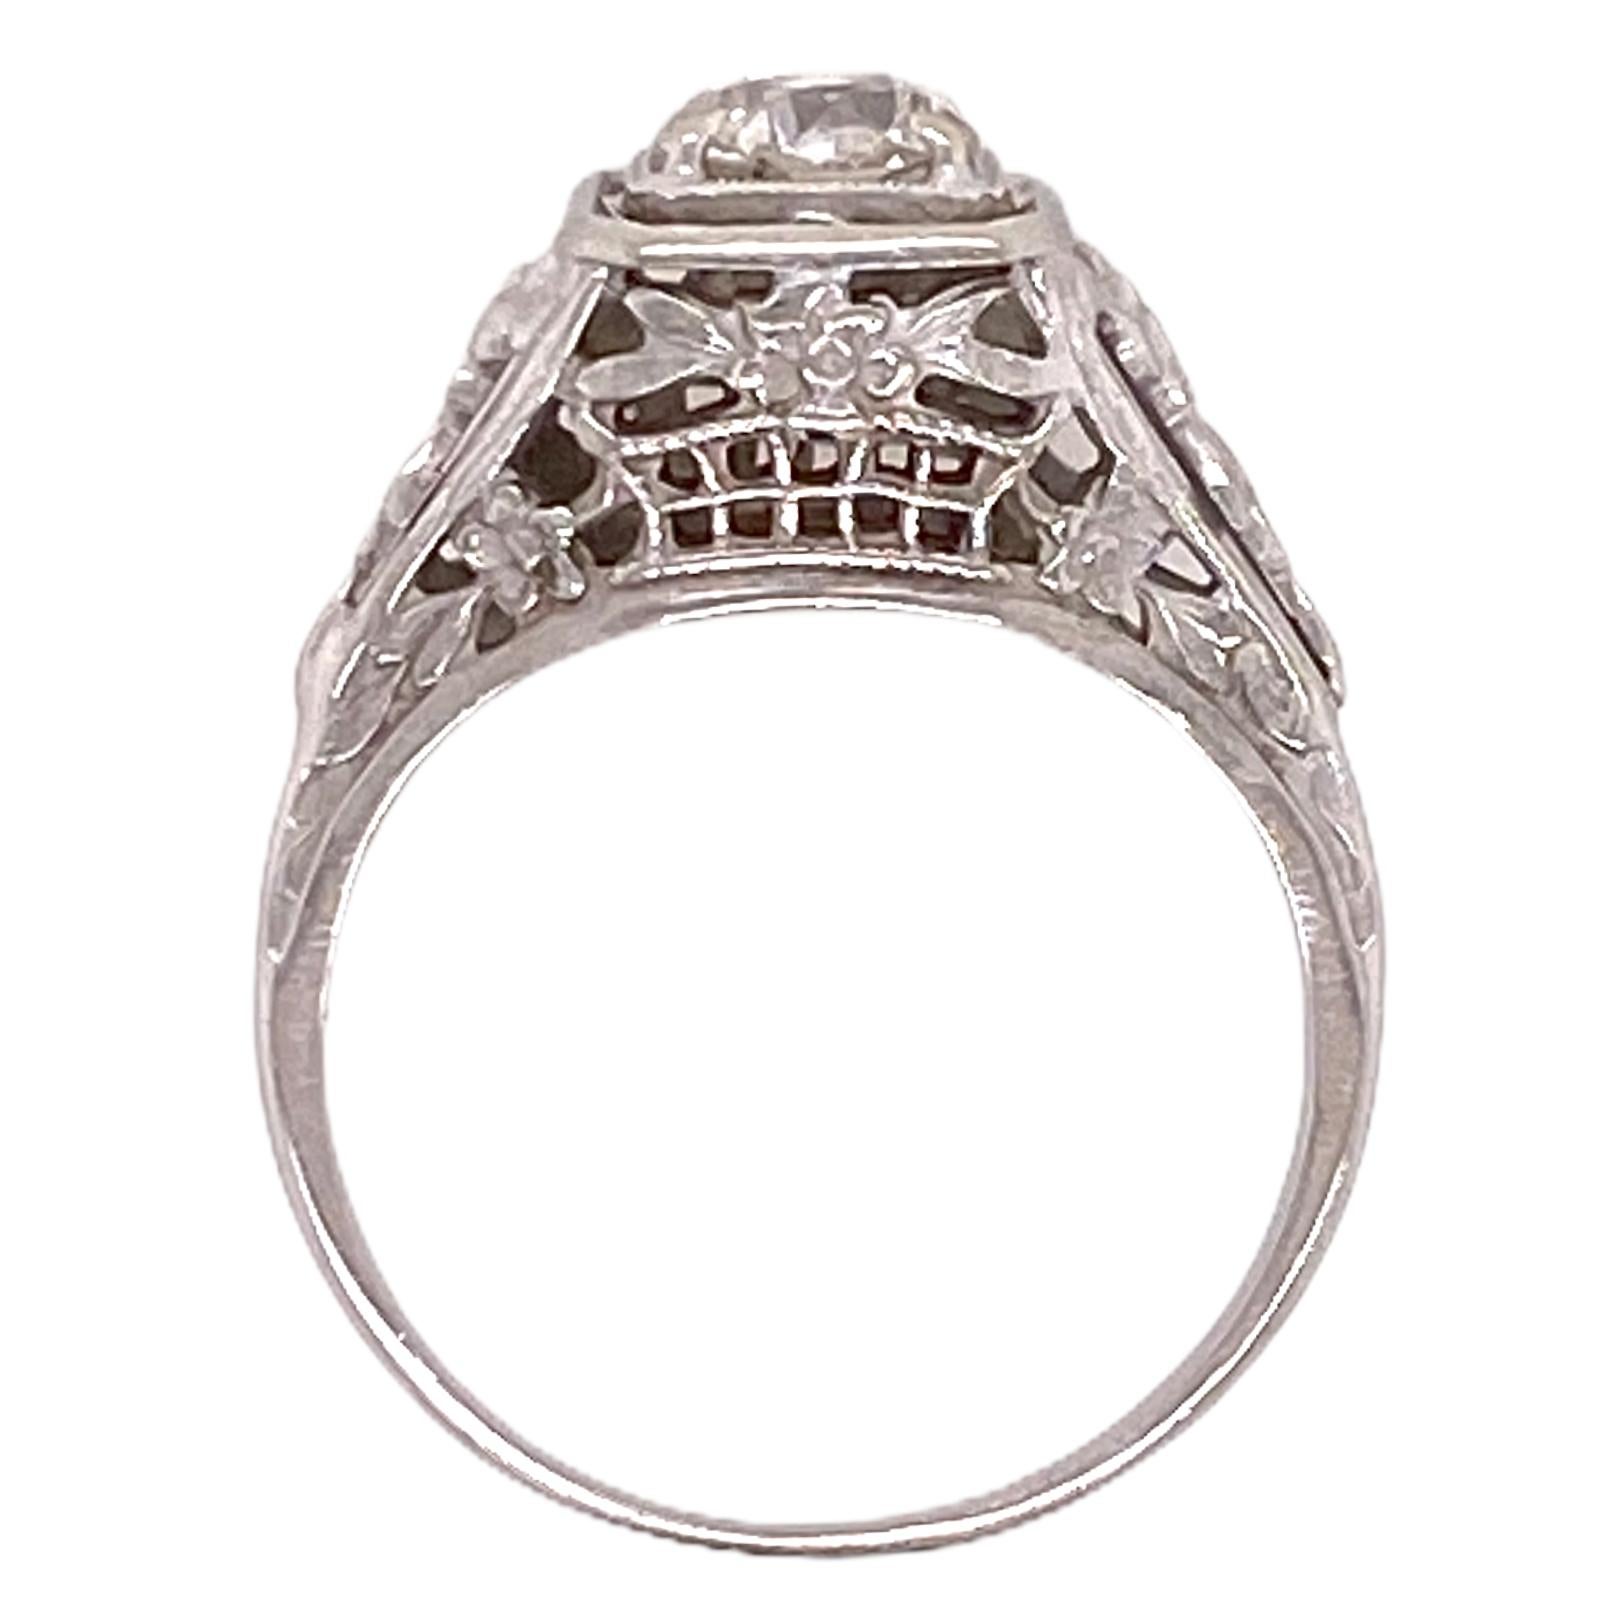 Stunning original Art Deco diamond engagement ring hand crafted in 18 karat white gold. The Old European Cut diamond weighs .59 carats and is graded I color and SI2 clarity by the GIA. THe GIA certificate number is 1182861095. The beautifully